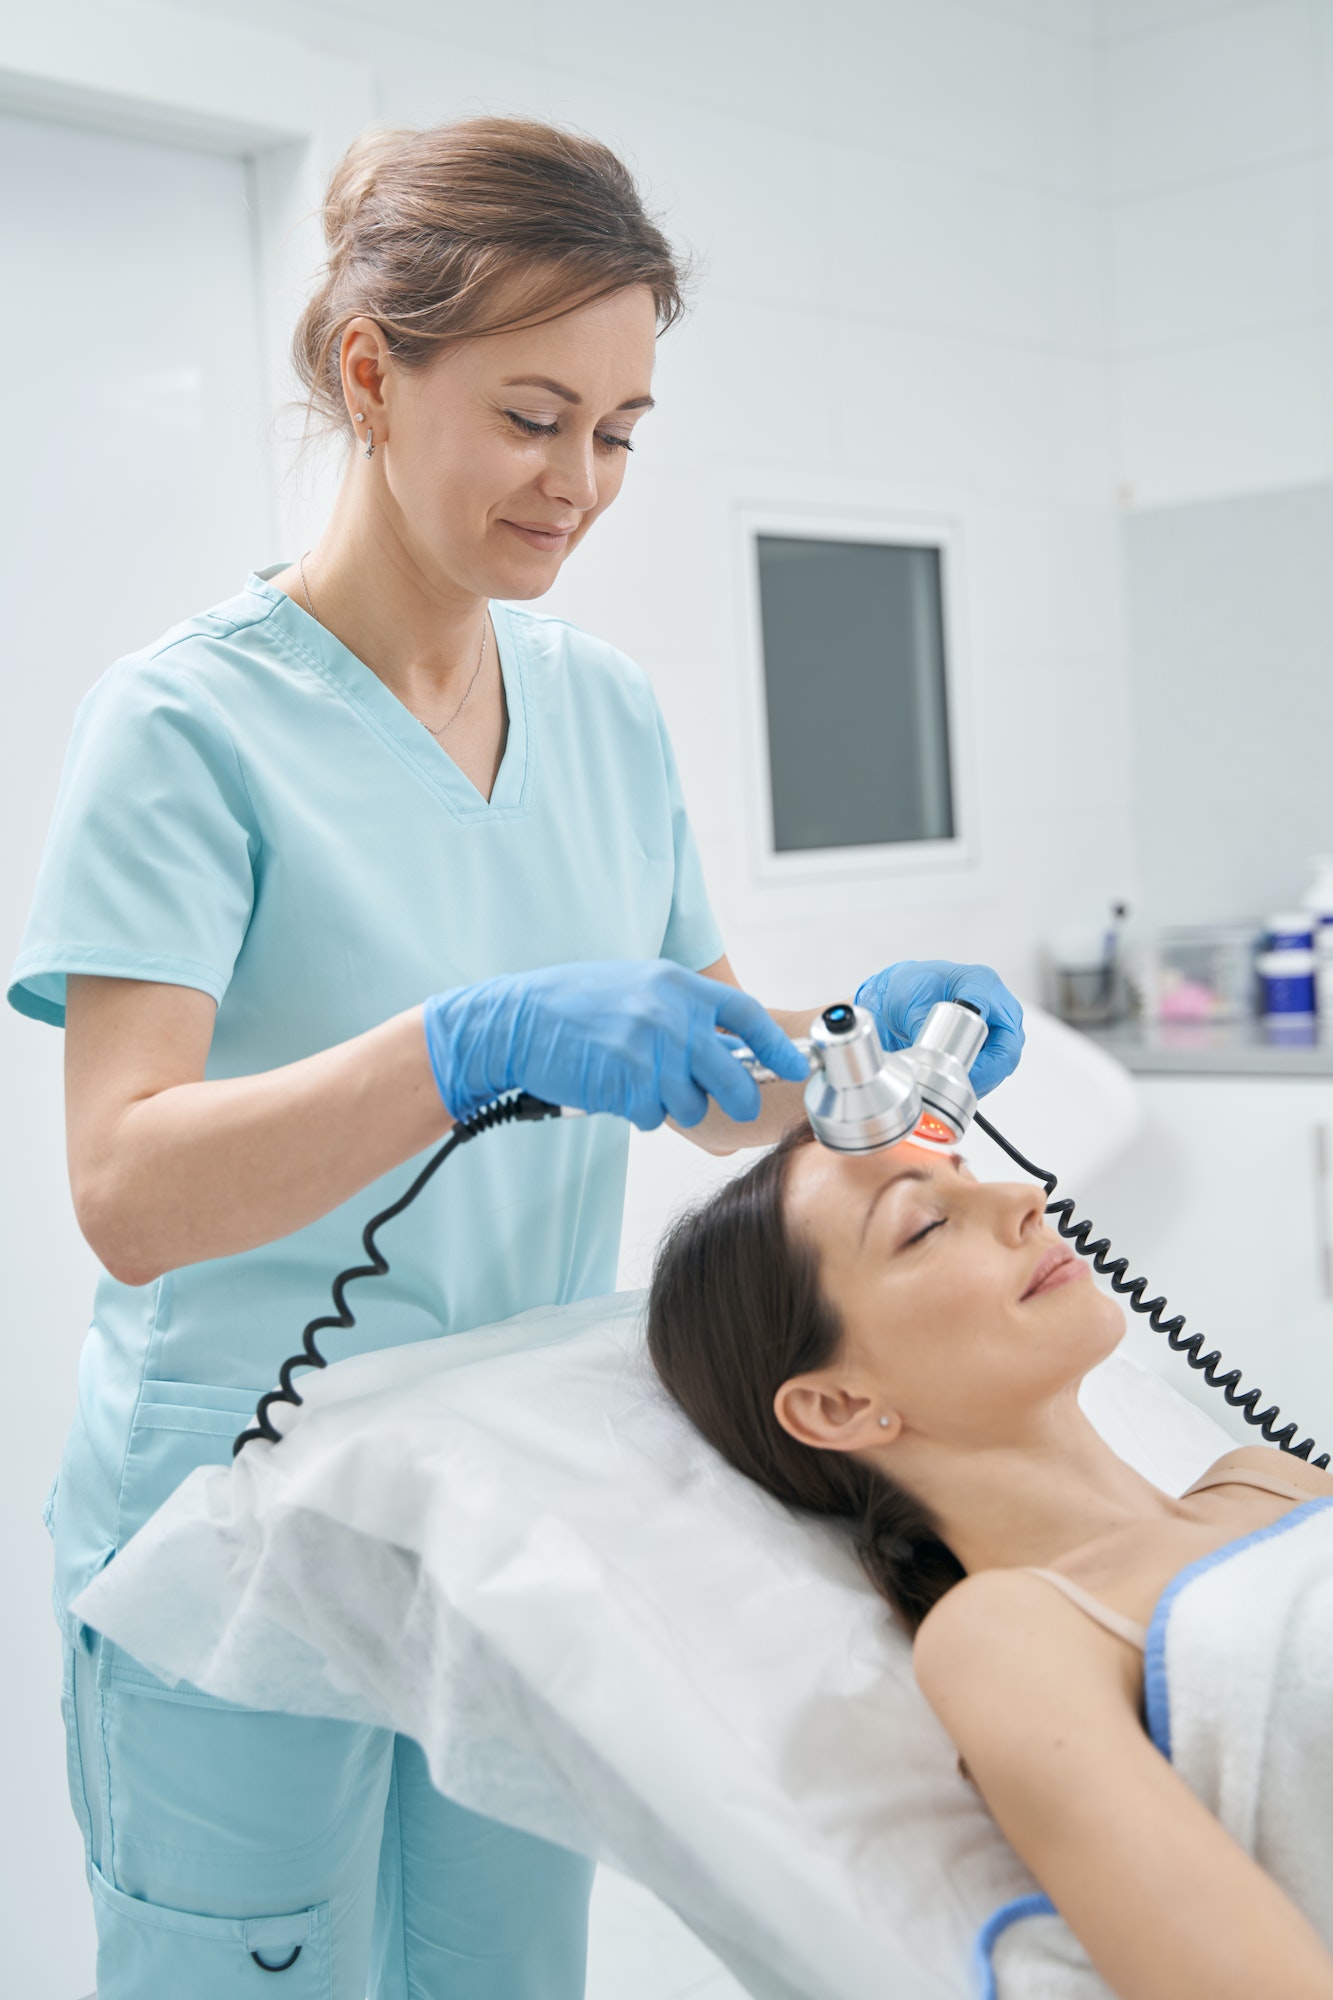 Cosmetologist performing radiofrequency facial treatment in clinic